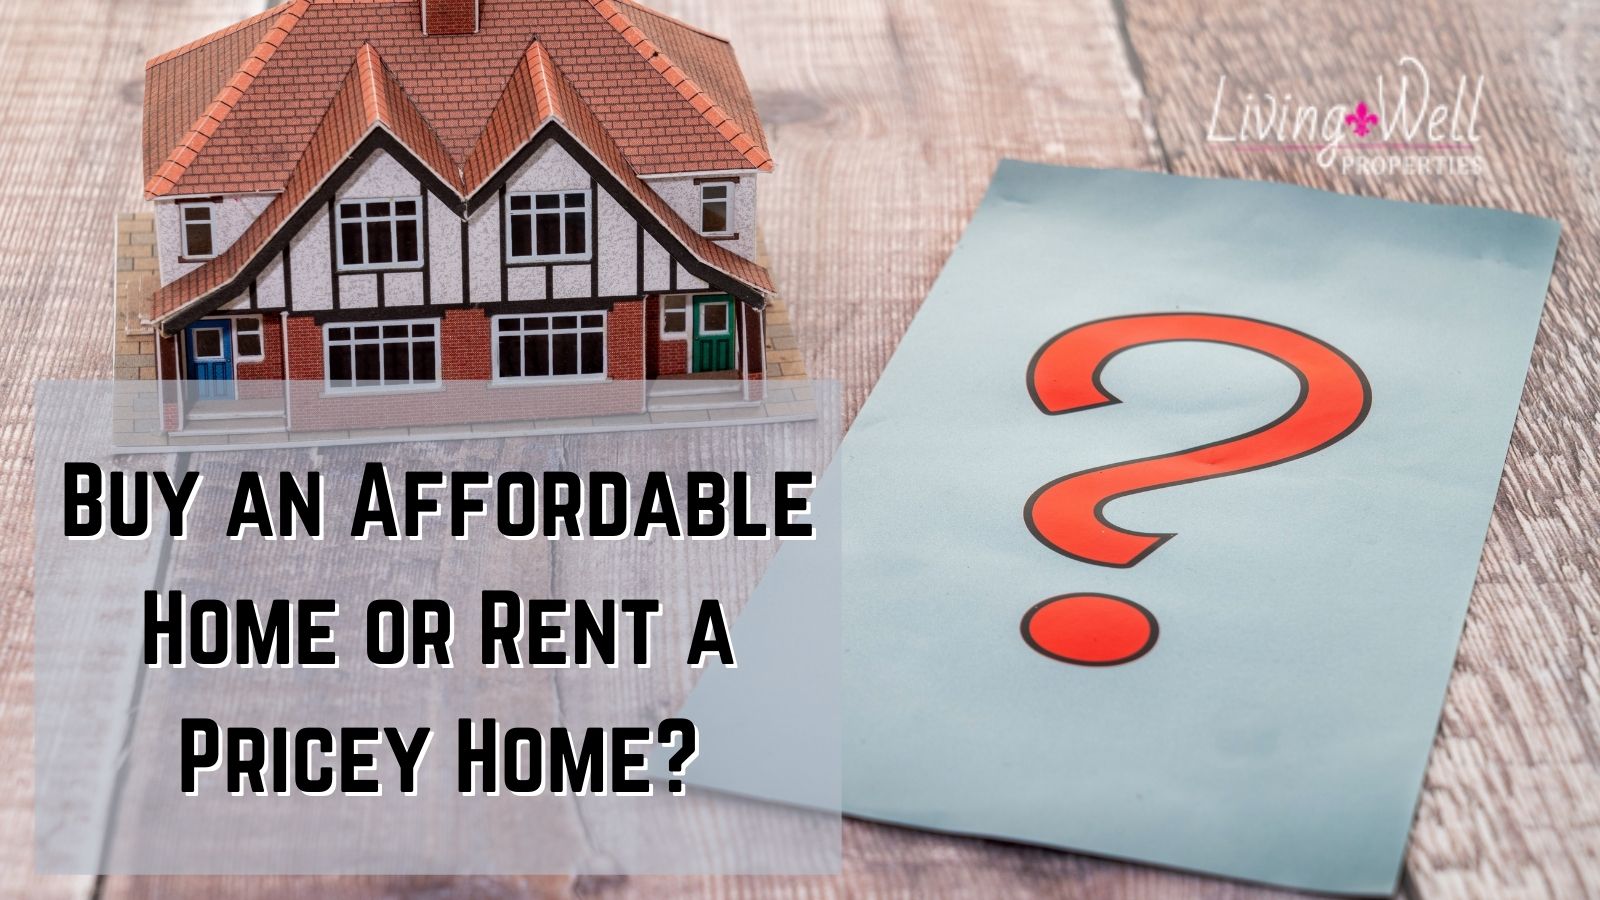 Buy an Affordable Home or Rent a Pricey Home